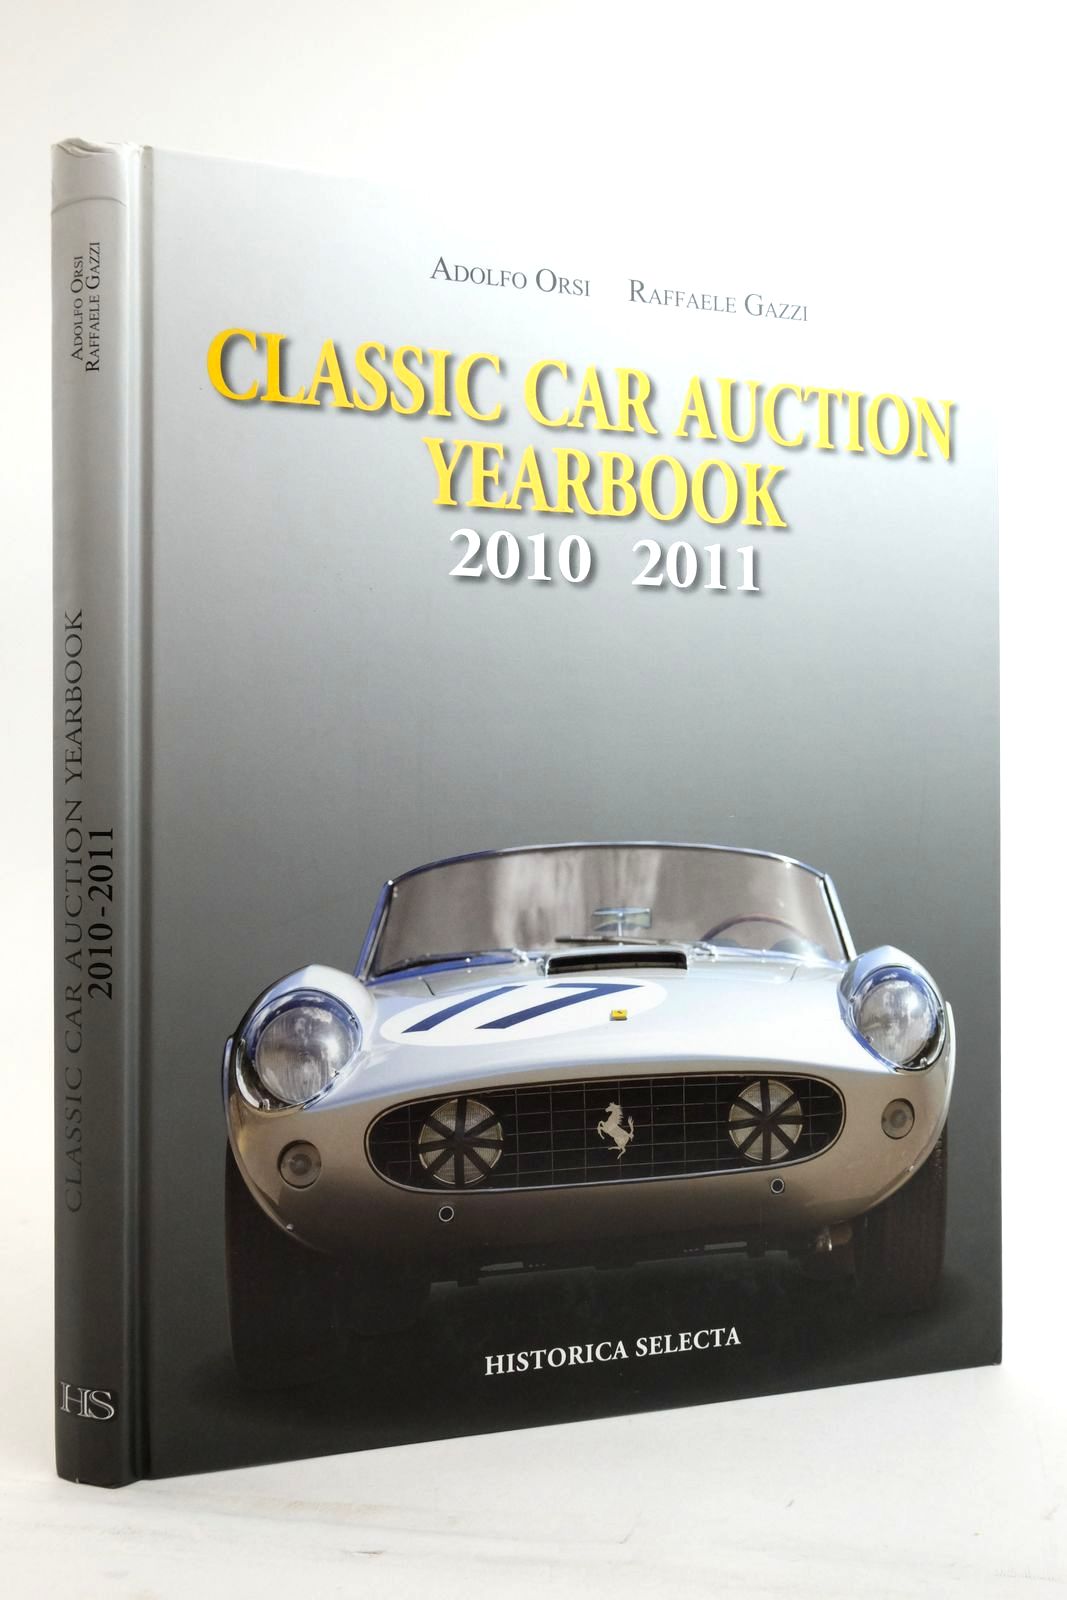 Photo of CLASSIC CAR AUCTION YEARBOOK 2010-2011 written by Orsi, Adolfo Gazzi, Raffaele published by Historica Selecta (STOCK CODE: 2136568)  for sale by Stella & Rose's Books